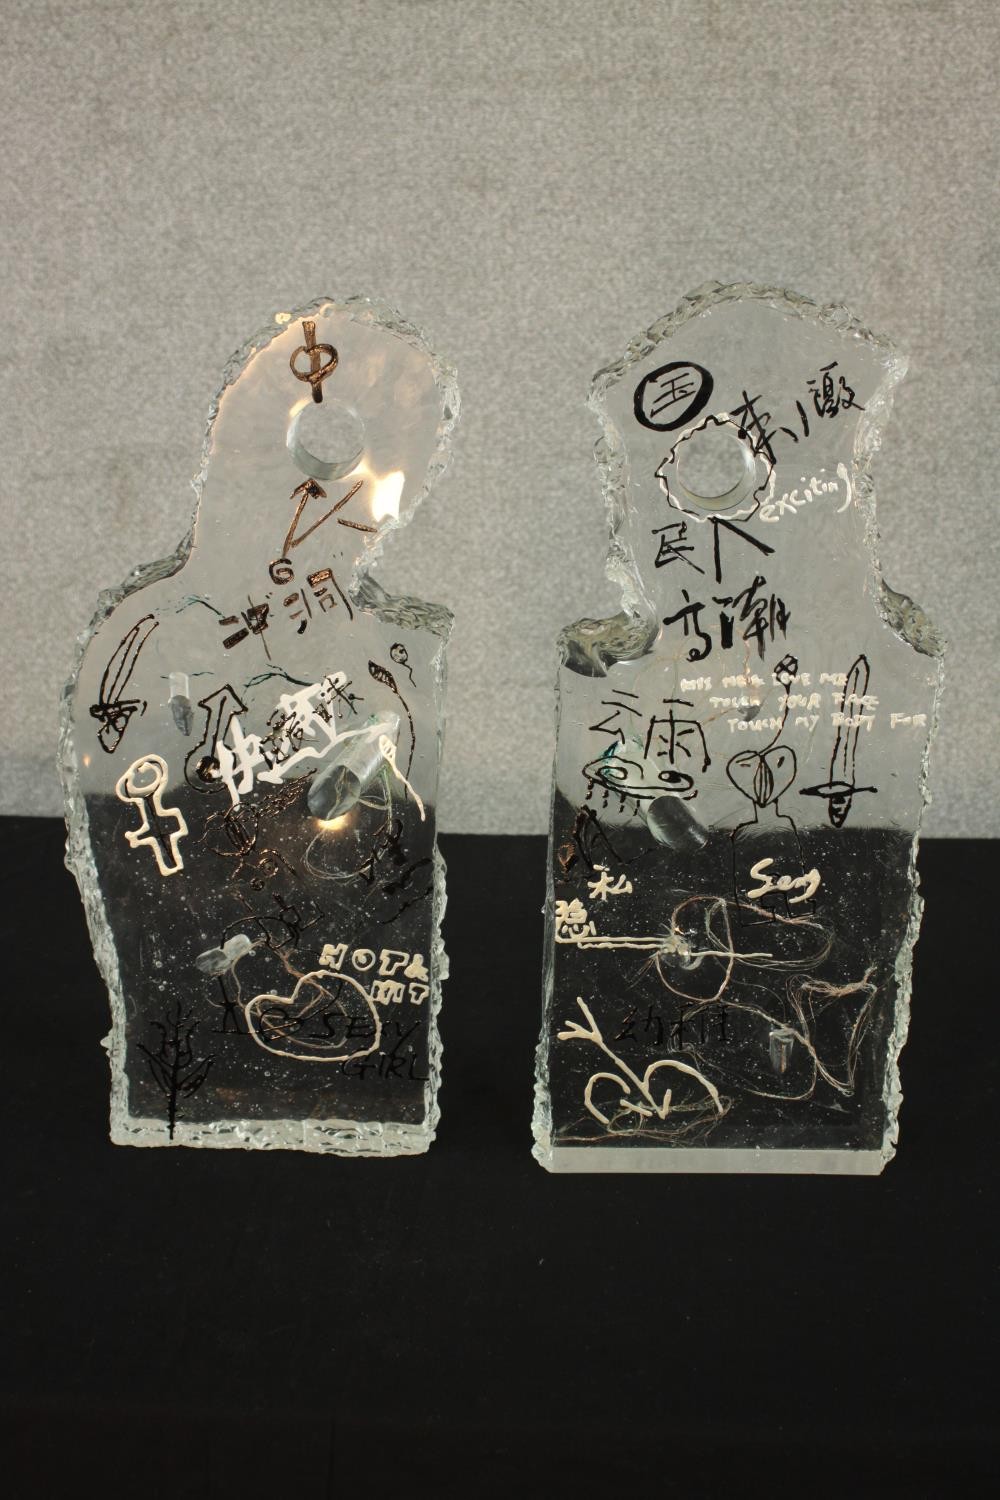 Two contemporary Asian glass sculptures, each with graffiti style decoration and suspended wire